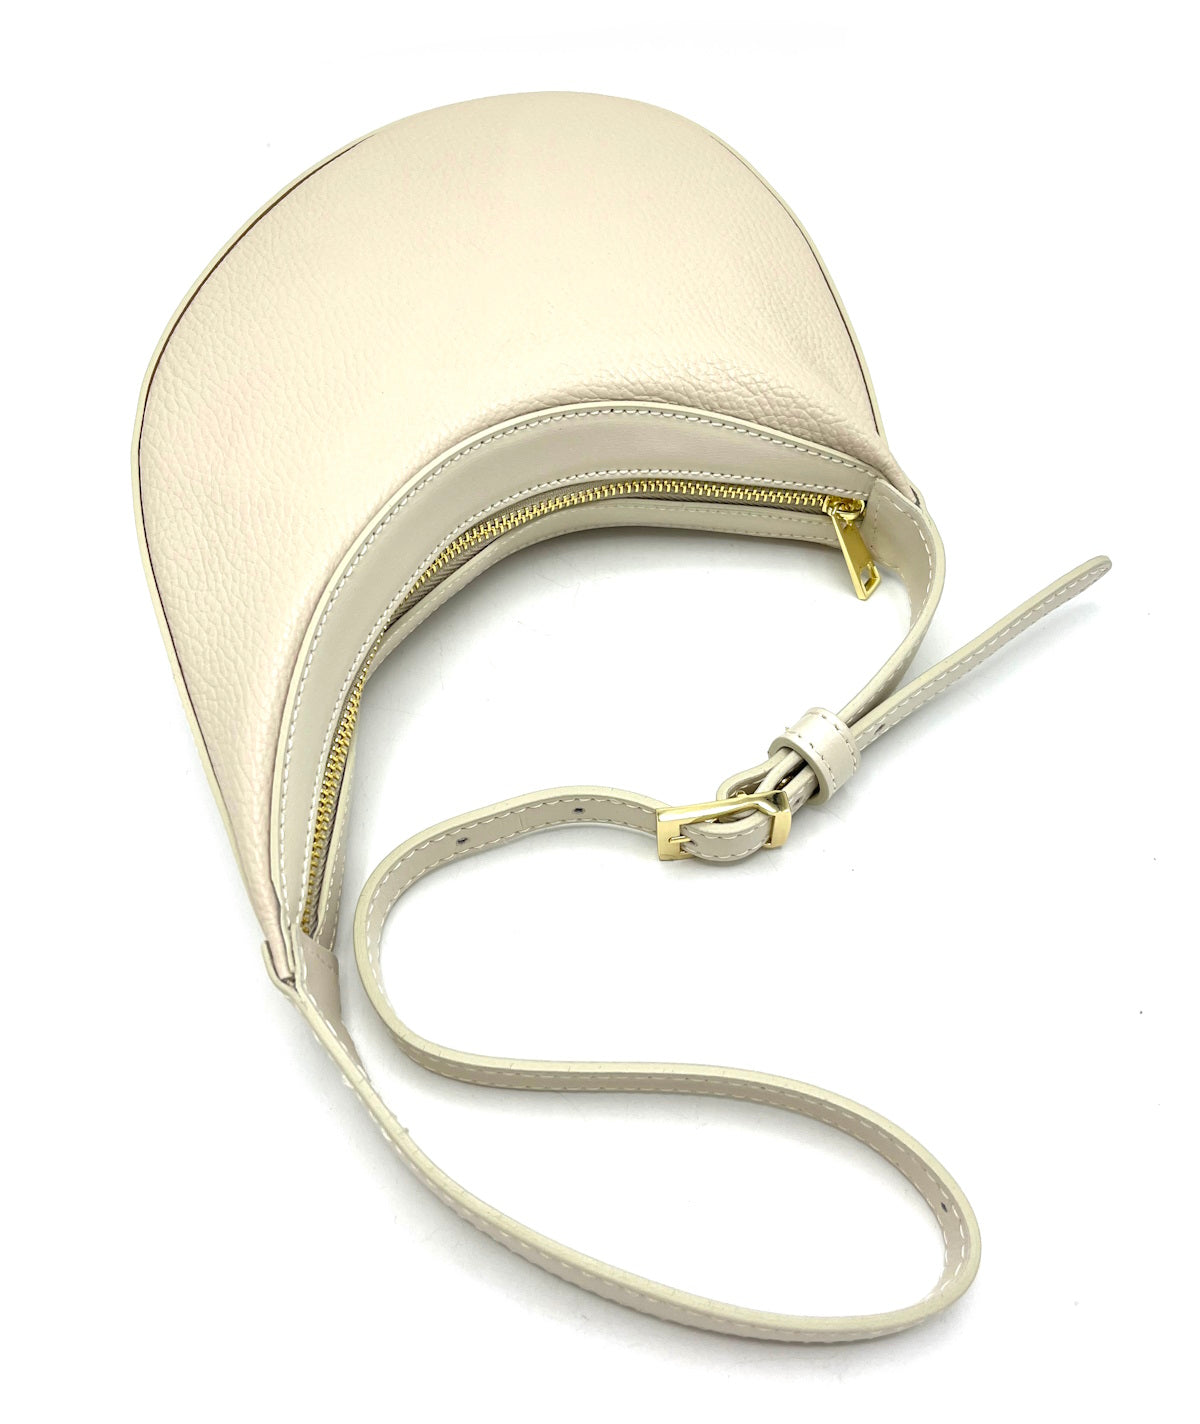 Genuine leather shoulder bag, Made in Italy, art. 112462